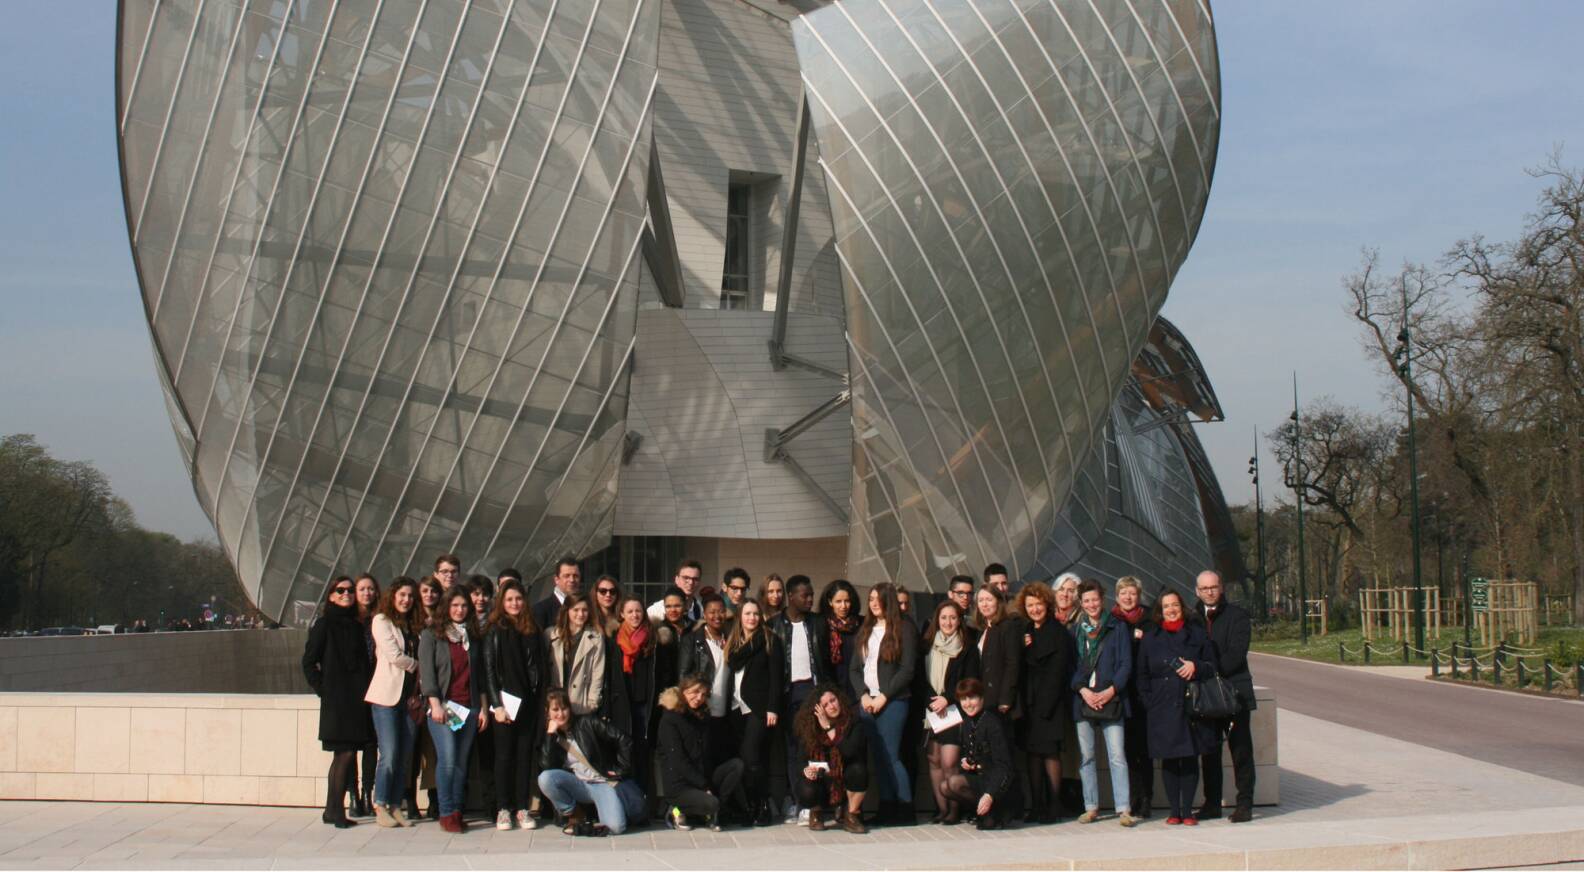 KEYS TO A PASSION AT FONDATION LOUIS VUITTON - News